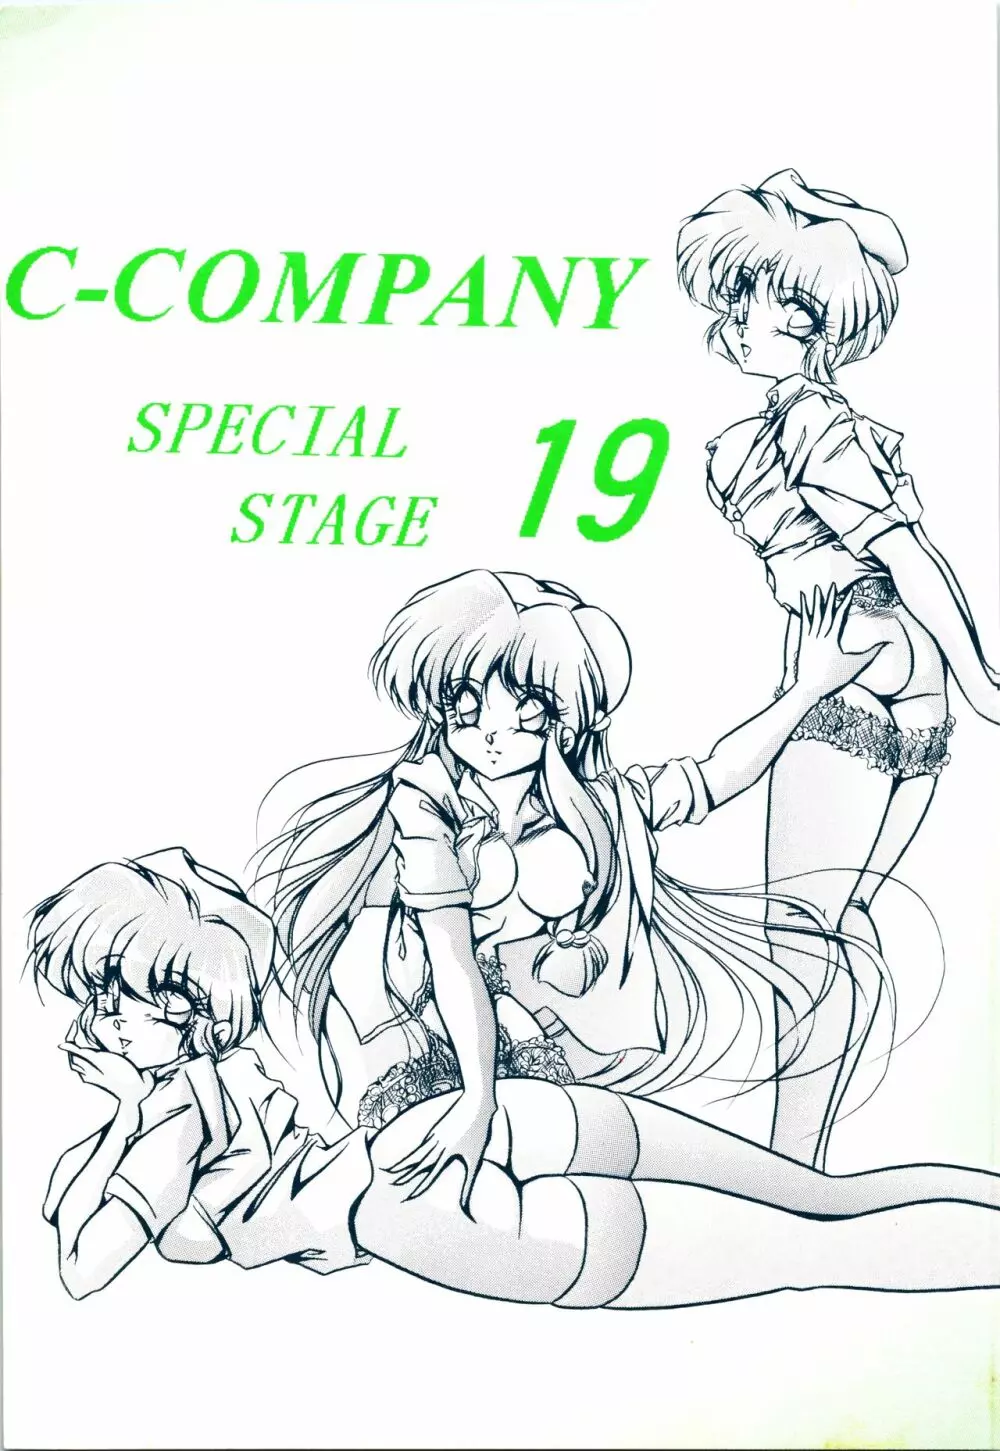 C-COMPANY SPECIAL STAGE 19 - page1